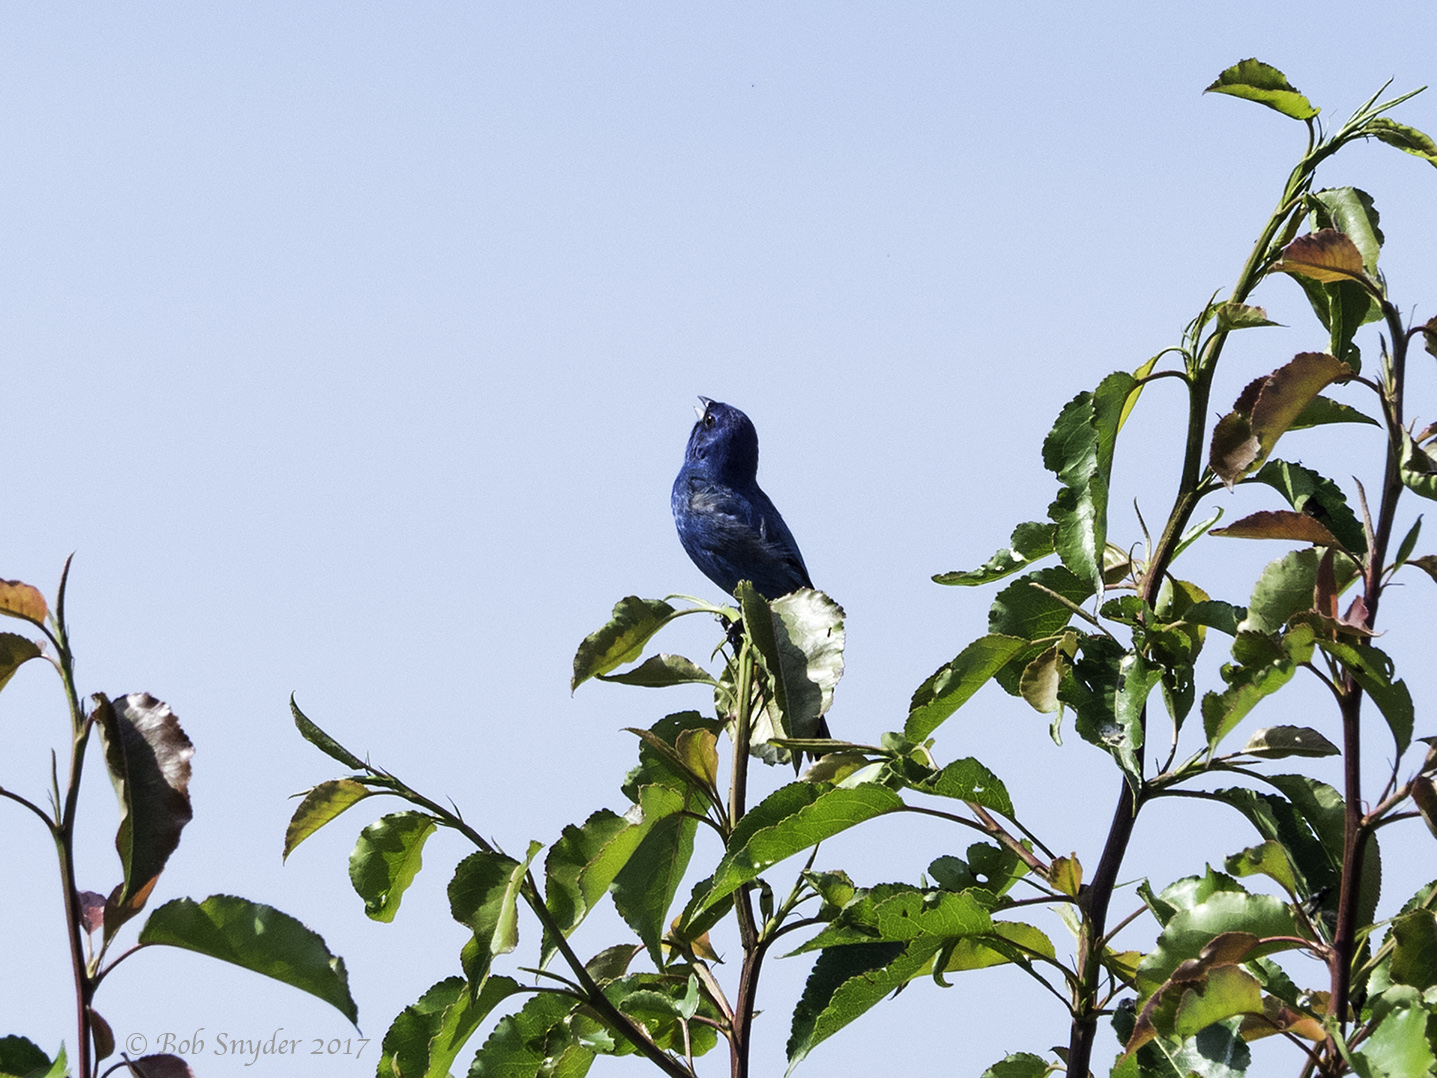 Indigo Bunting male singing from territorial perch.